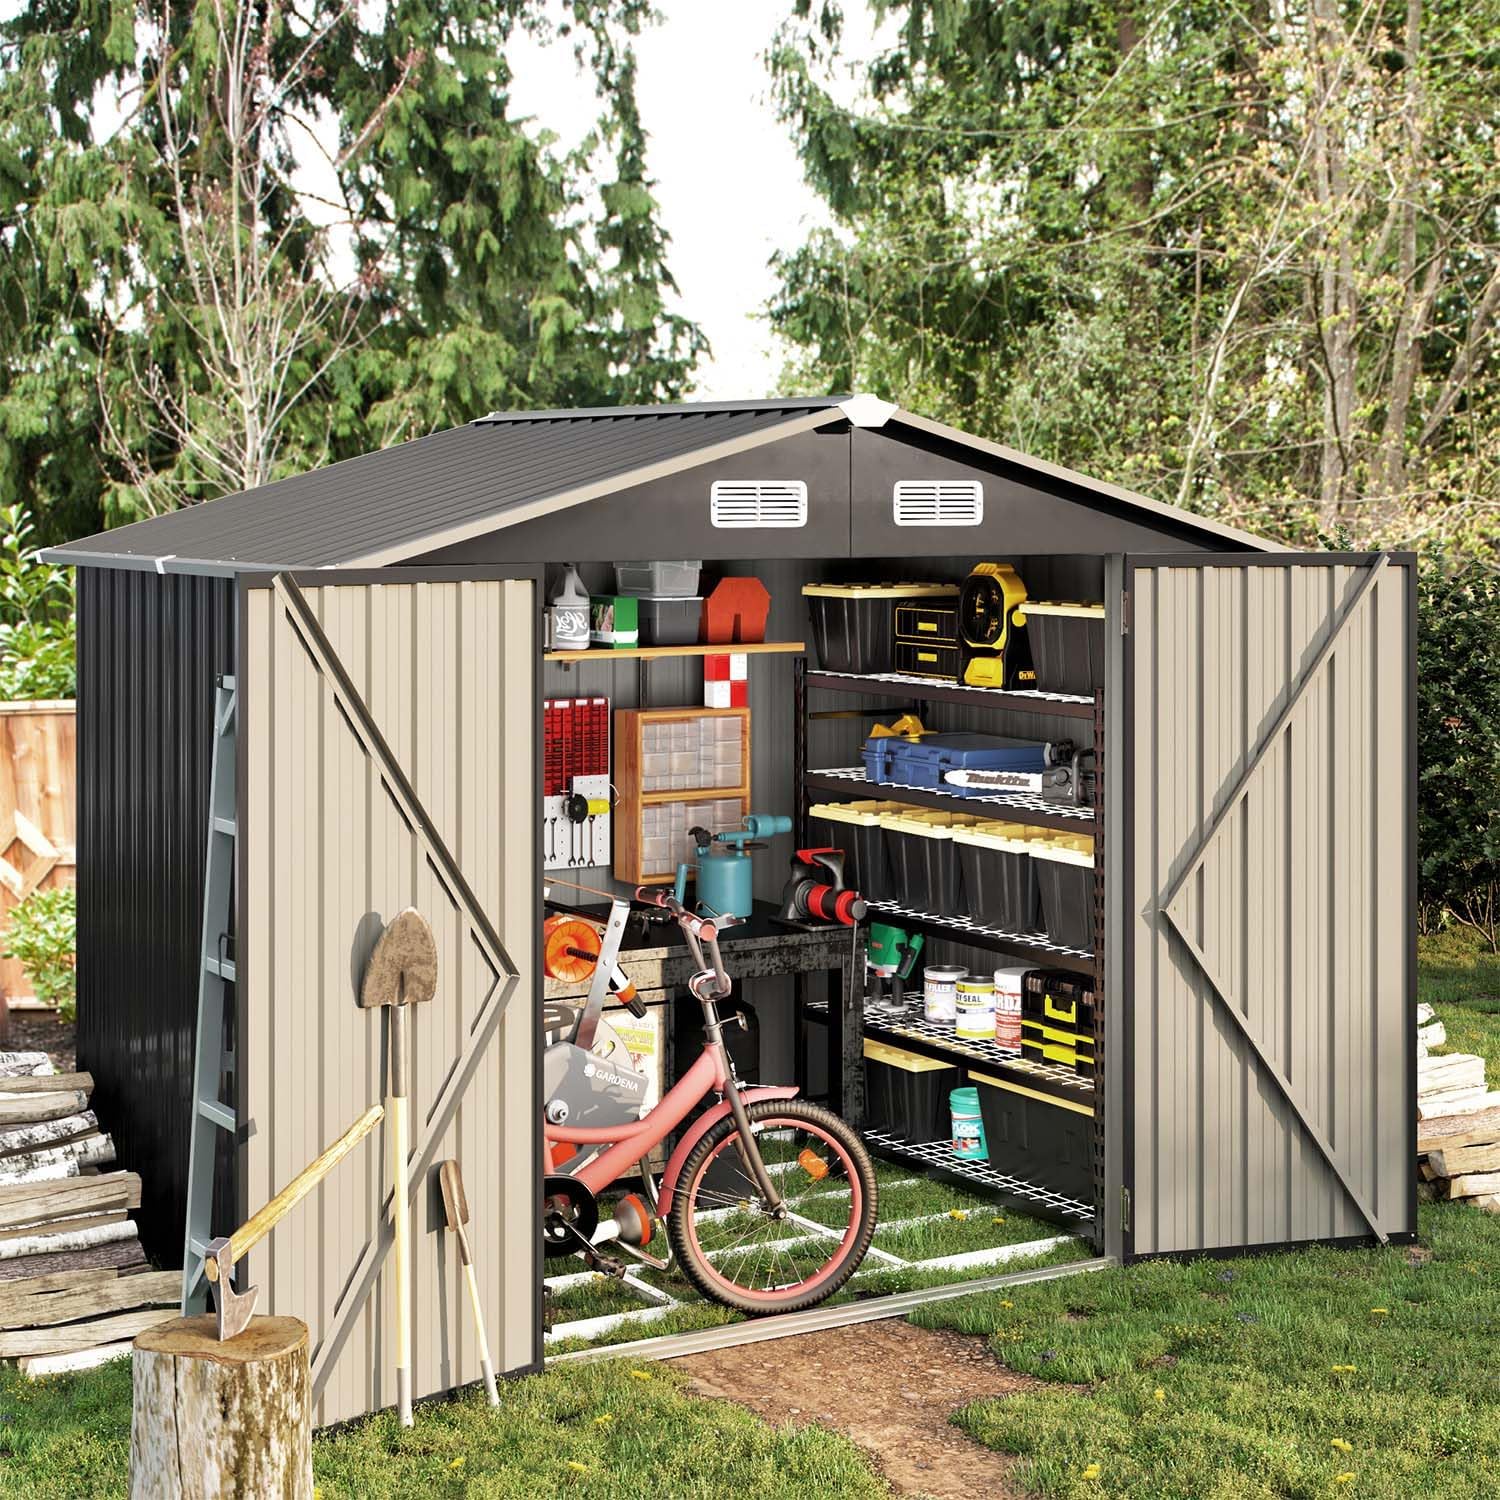 7.8' x 5.8' Metal Utility Tool Shed, Steel Storage Shed with Air Vent & Lockable Doors, Grey / Black